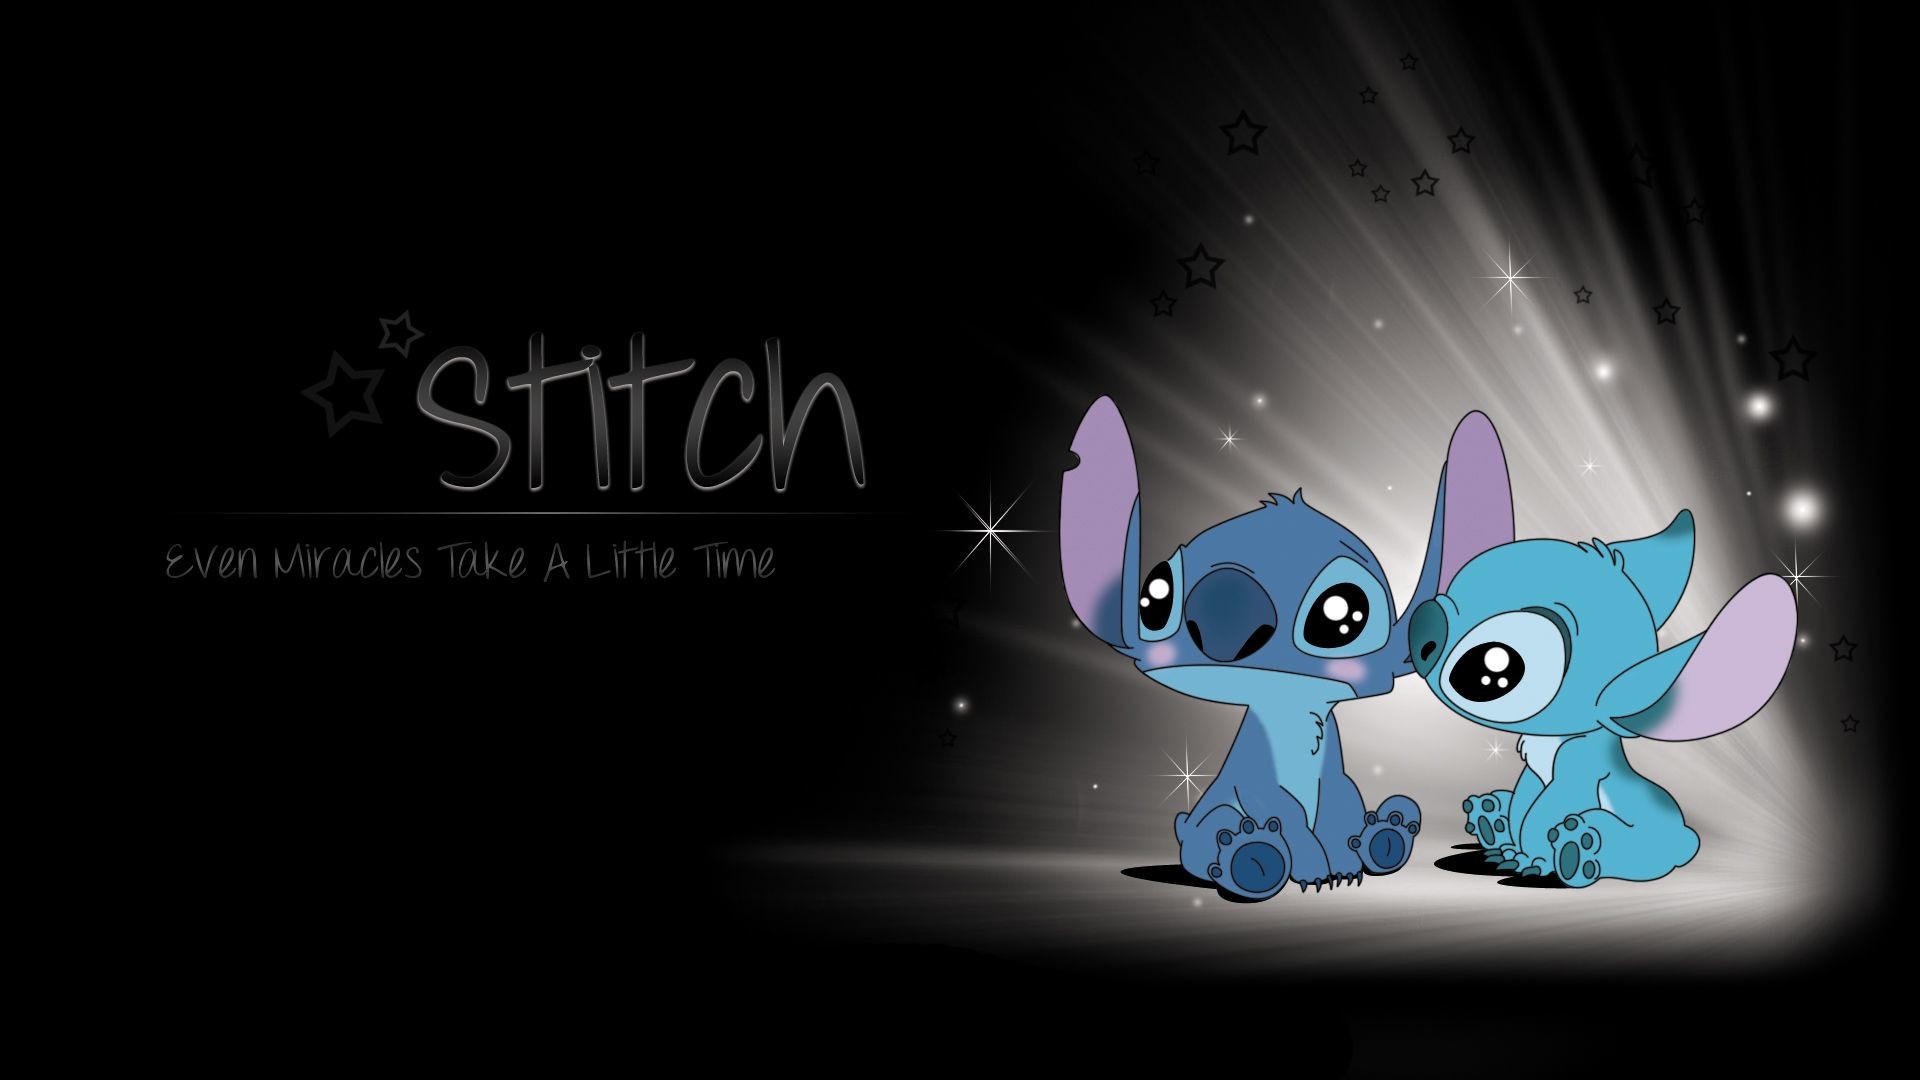 Download Keep up with the latest tech with Stitch Computer Wallpaper   Wallpaperscom